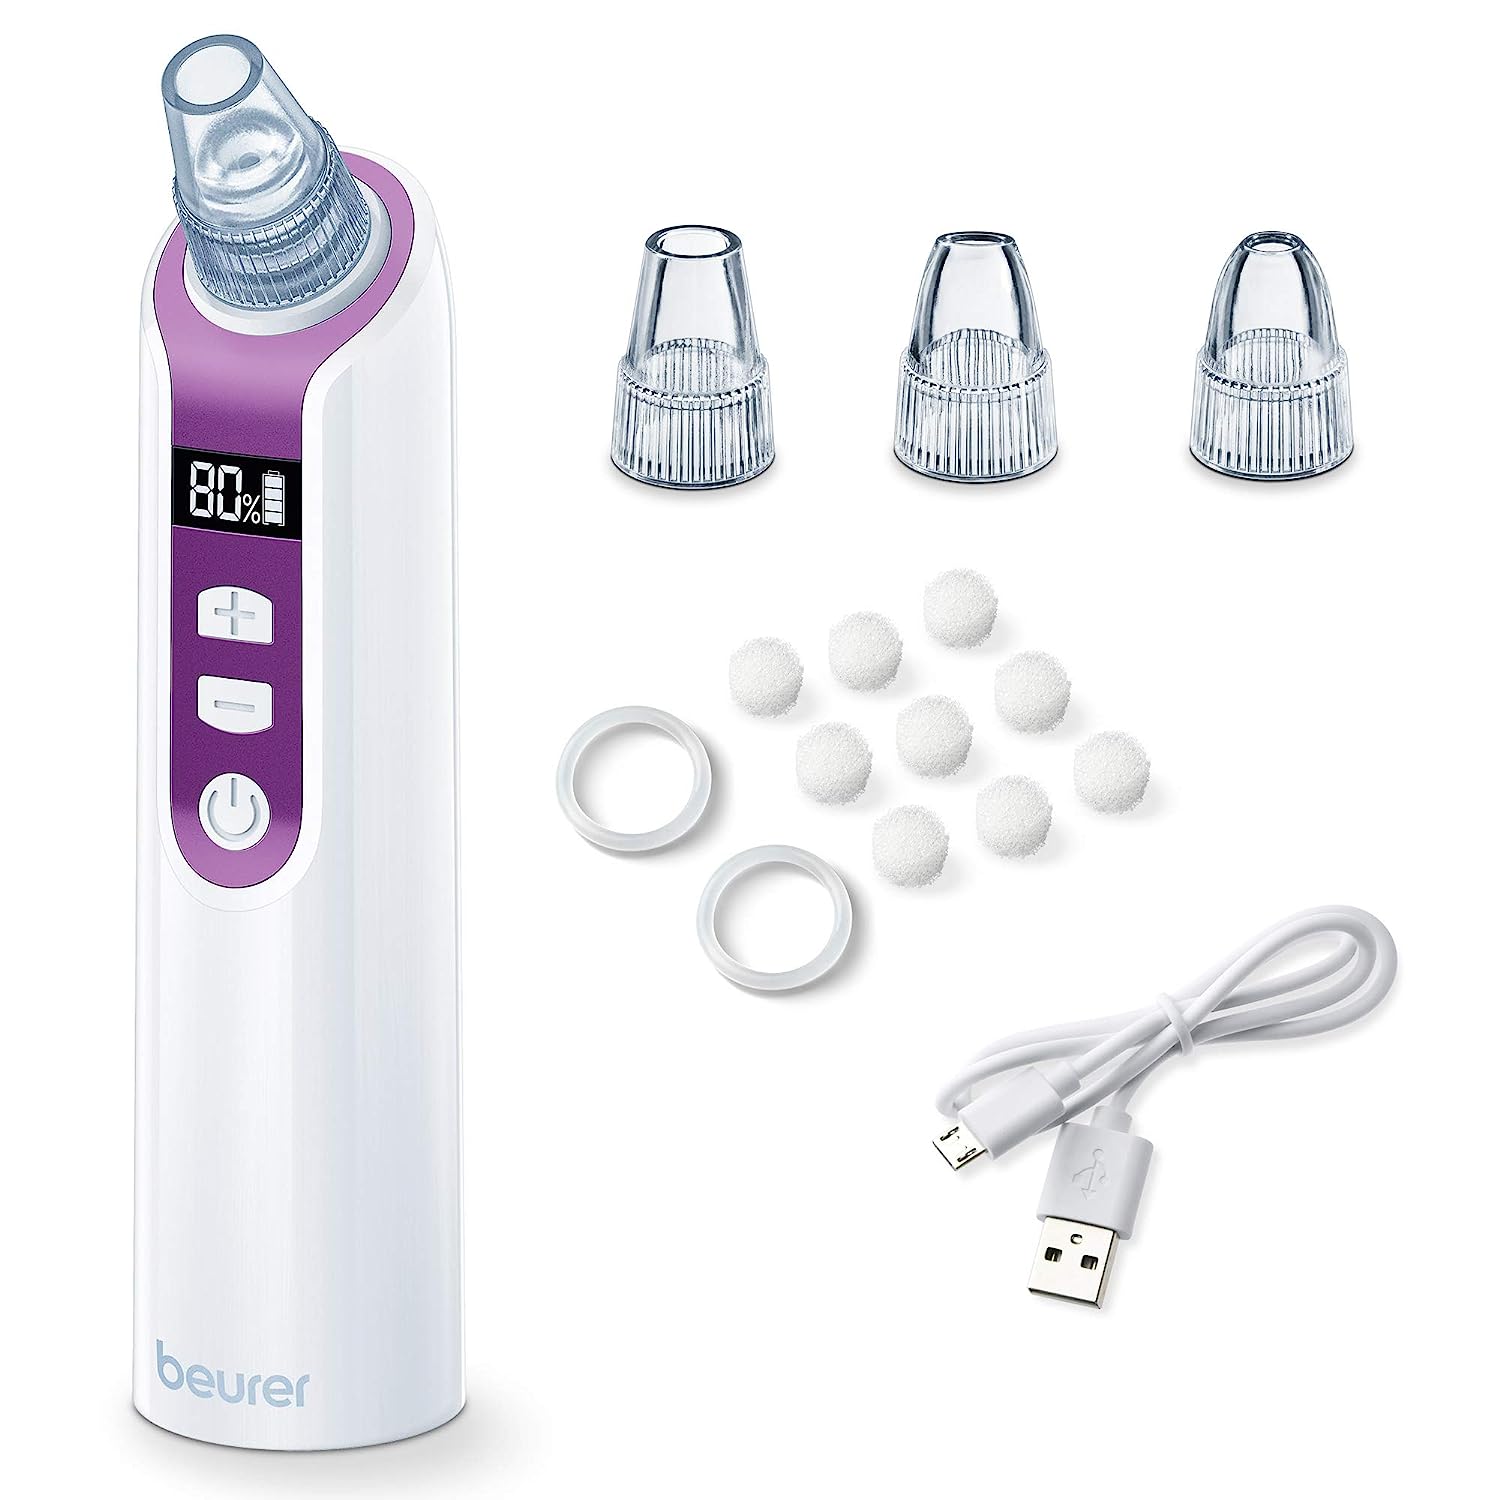 Beurer FC 41 Pore Cleaner, Electric Blackhead Remover for Deep Pore Cleaning, 5 Intensity Levels and 3 Individual Attachments, Suitable for All Skin Types (Pack of 1)